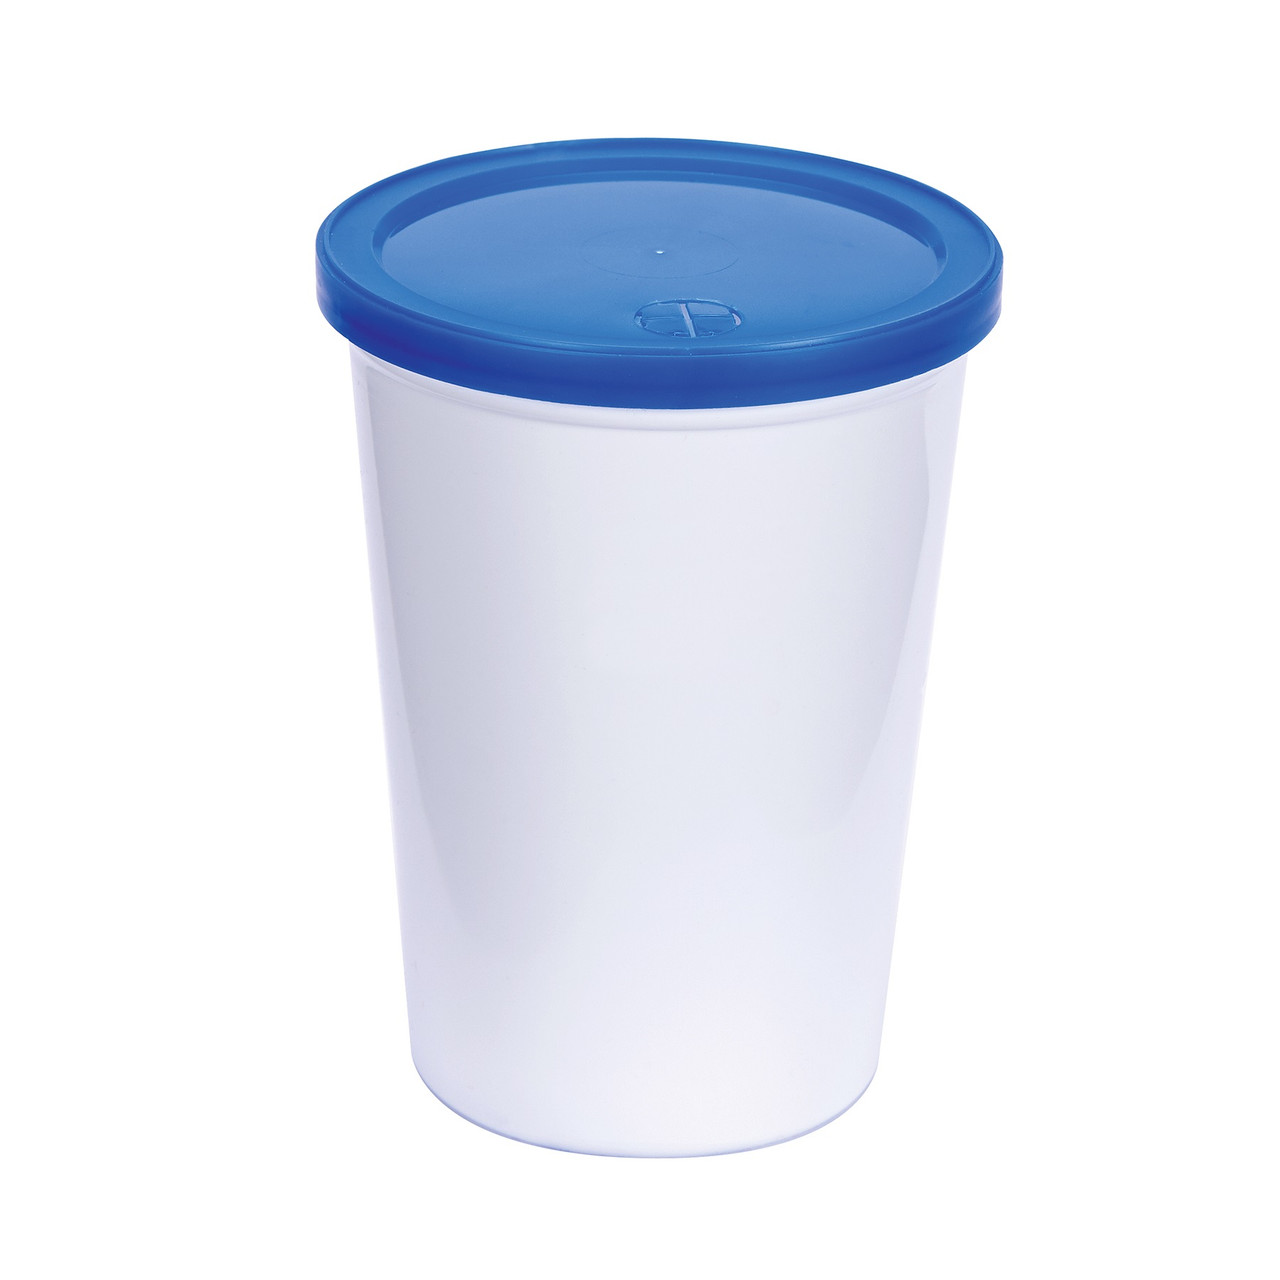 Fun-Cups™ Kid Cups 12 fl oz (355ml) Silly Faces Thermo Cup Combo Pack w/ Sip Lid (VK2KIDCUP-SL)